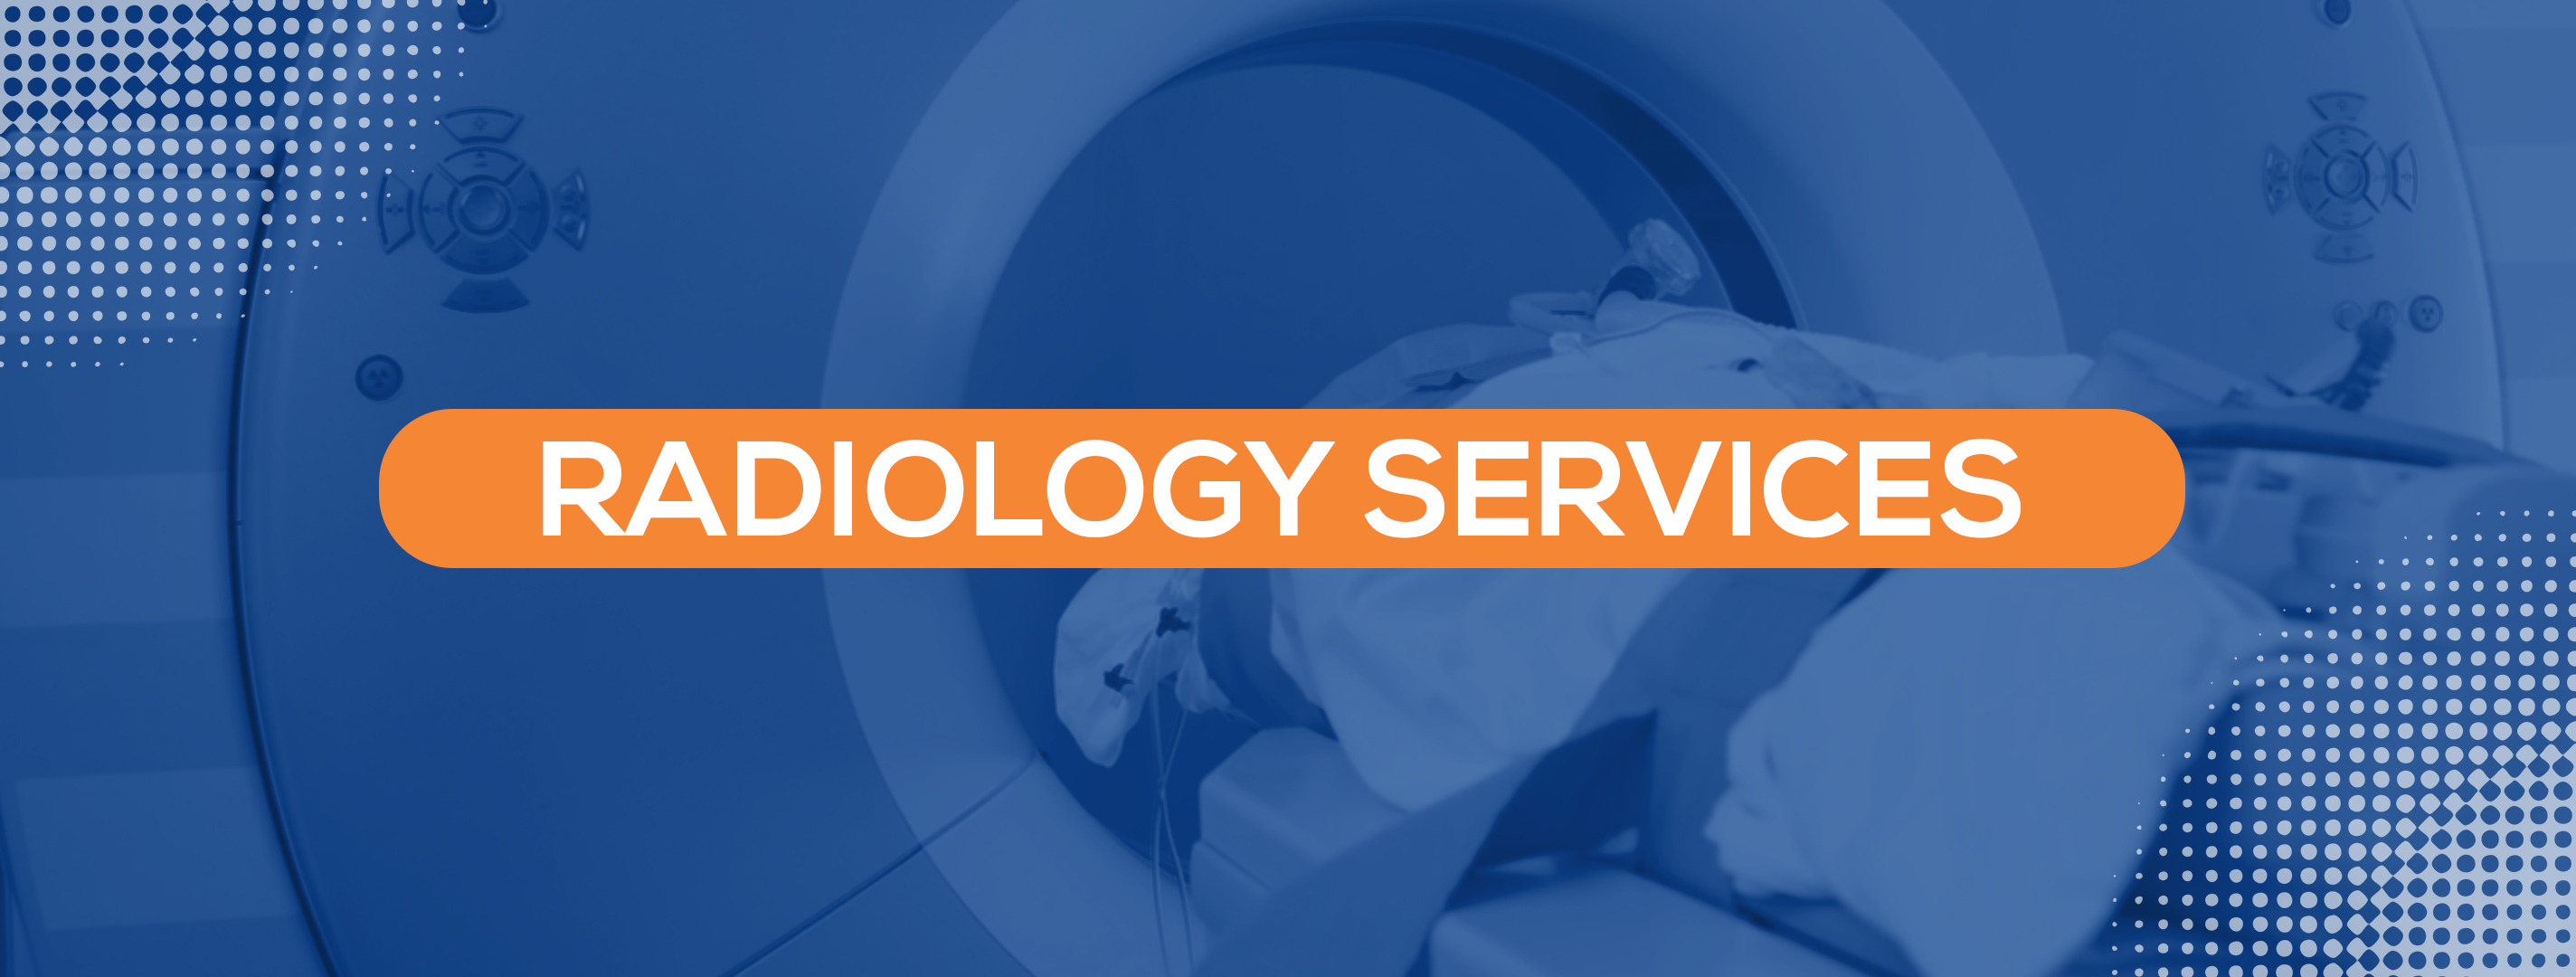 RADIOLOGYSERVICES